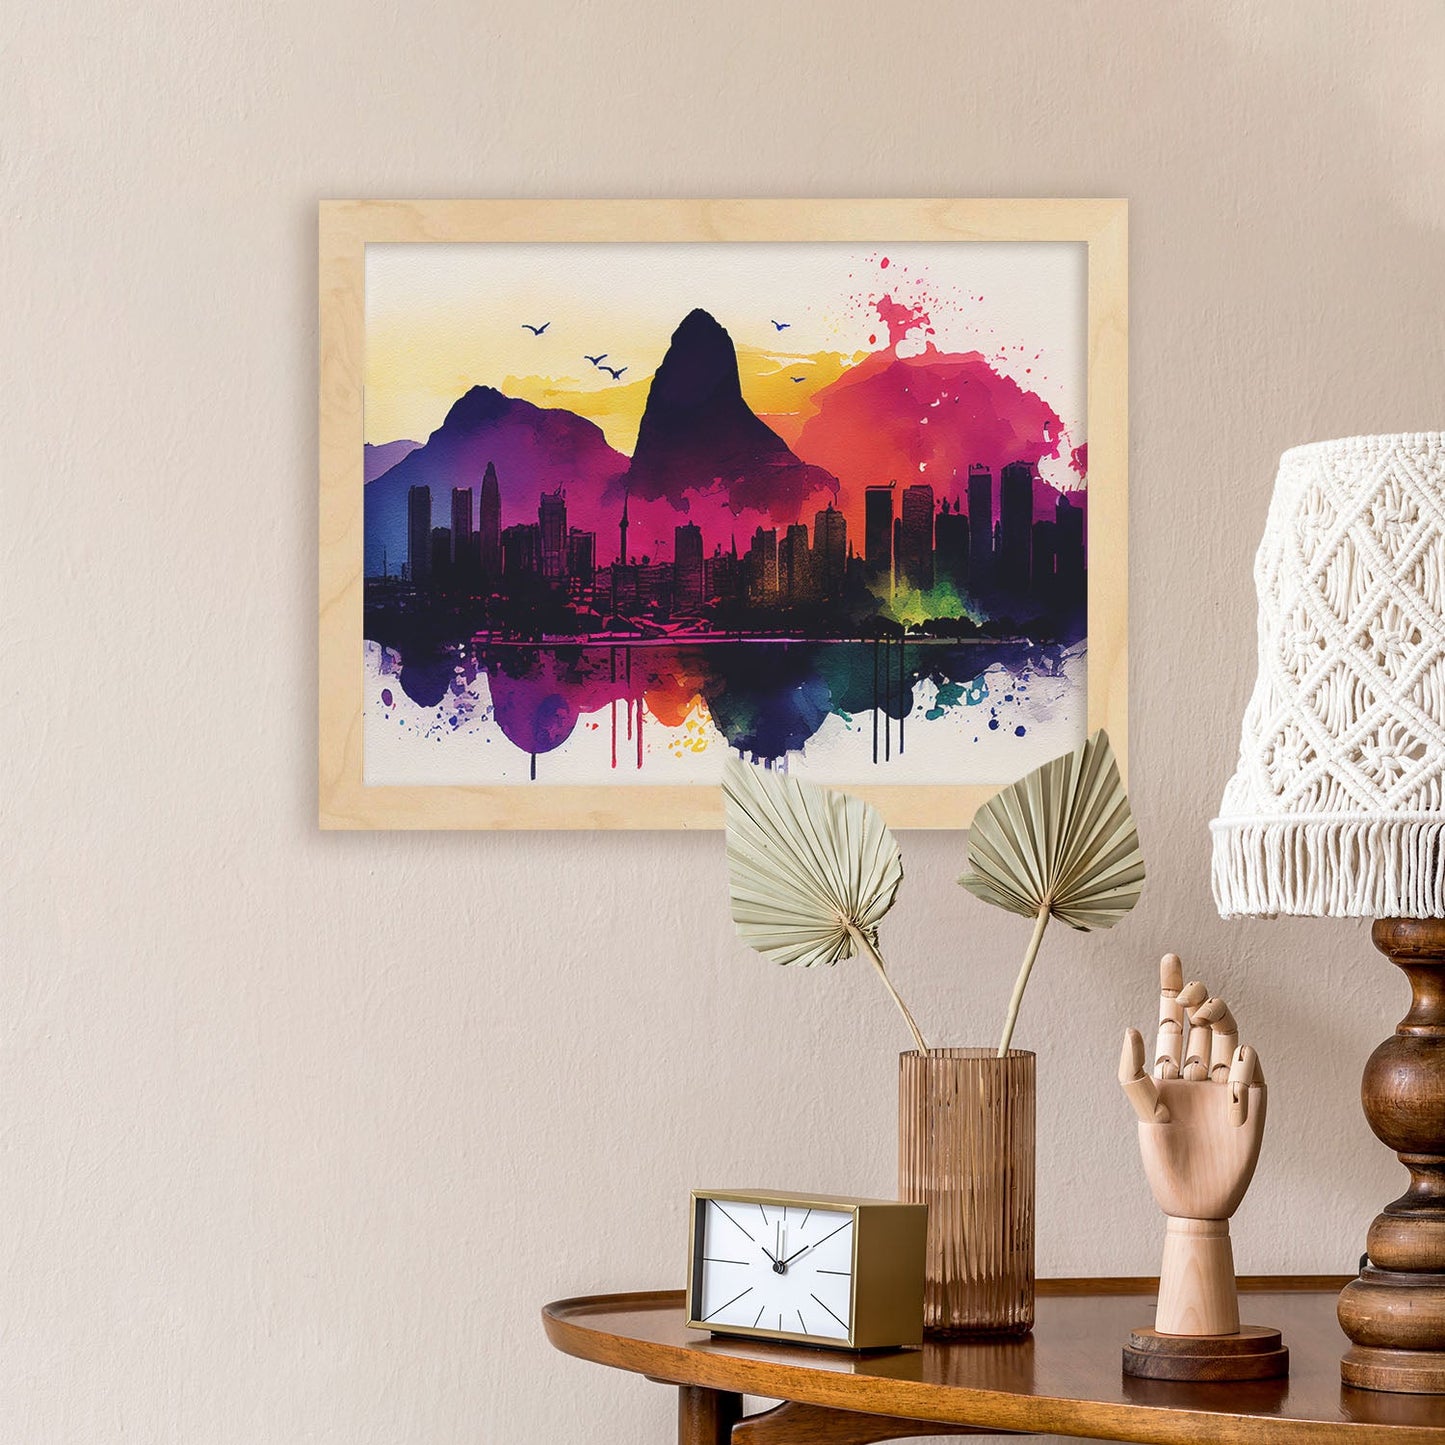 Nacnic watercolor of a skyline of the city of Rio de Janeiro_2. Aesthetic Wall Art Prints for Bedroom or Living Room Design.